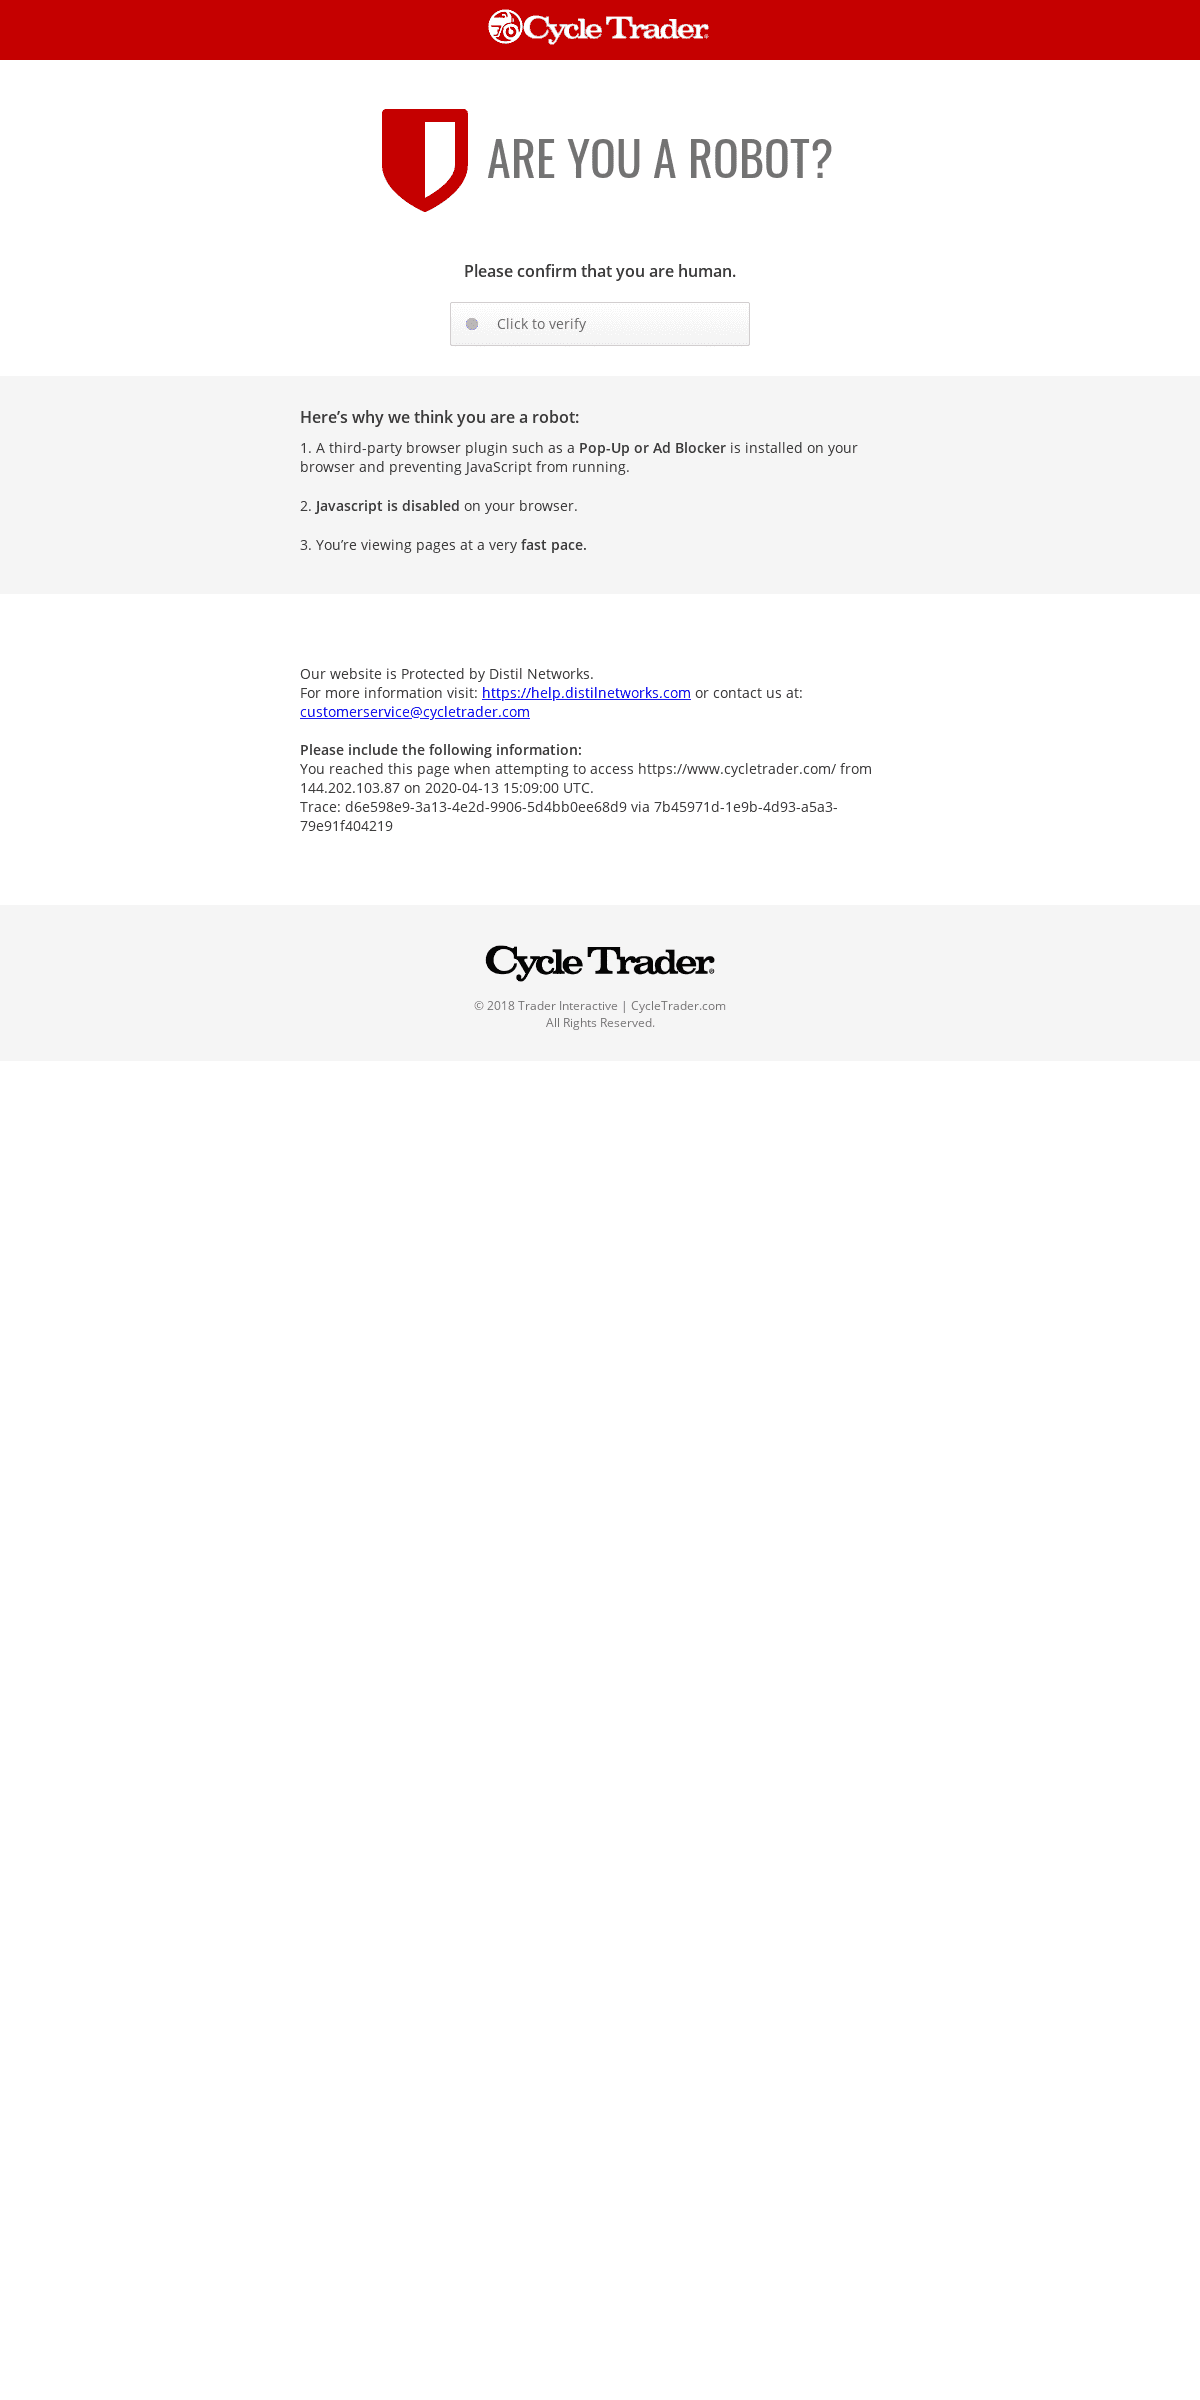 A complete backup of cycletrader.com